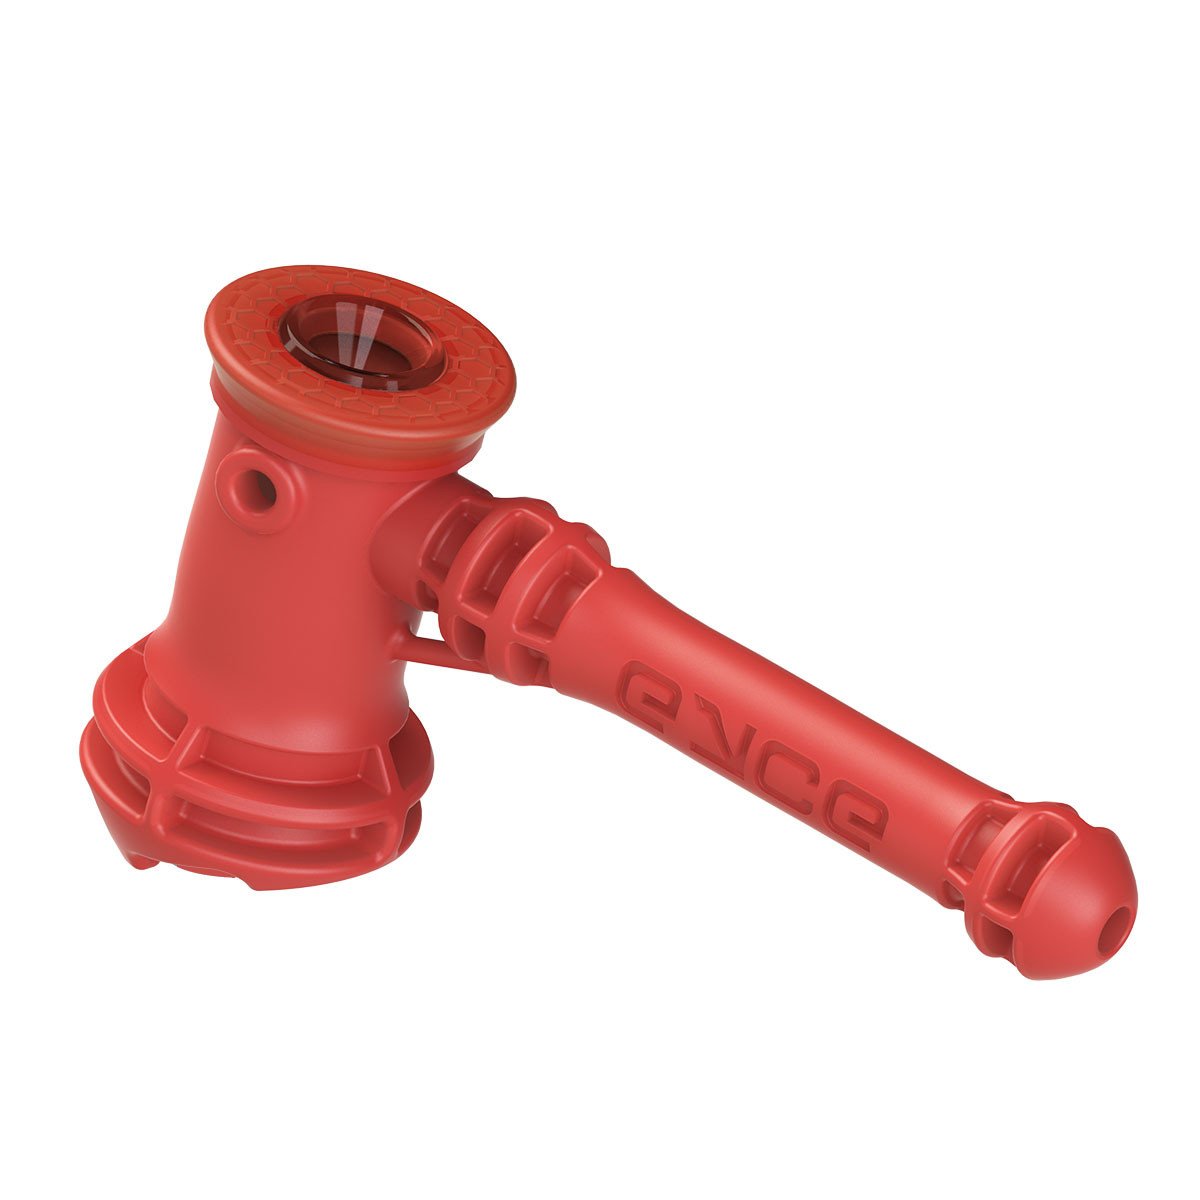 EYCE Silicone Hammer Bubbler in Red, Durable Design with Deep Bowl, Side View